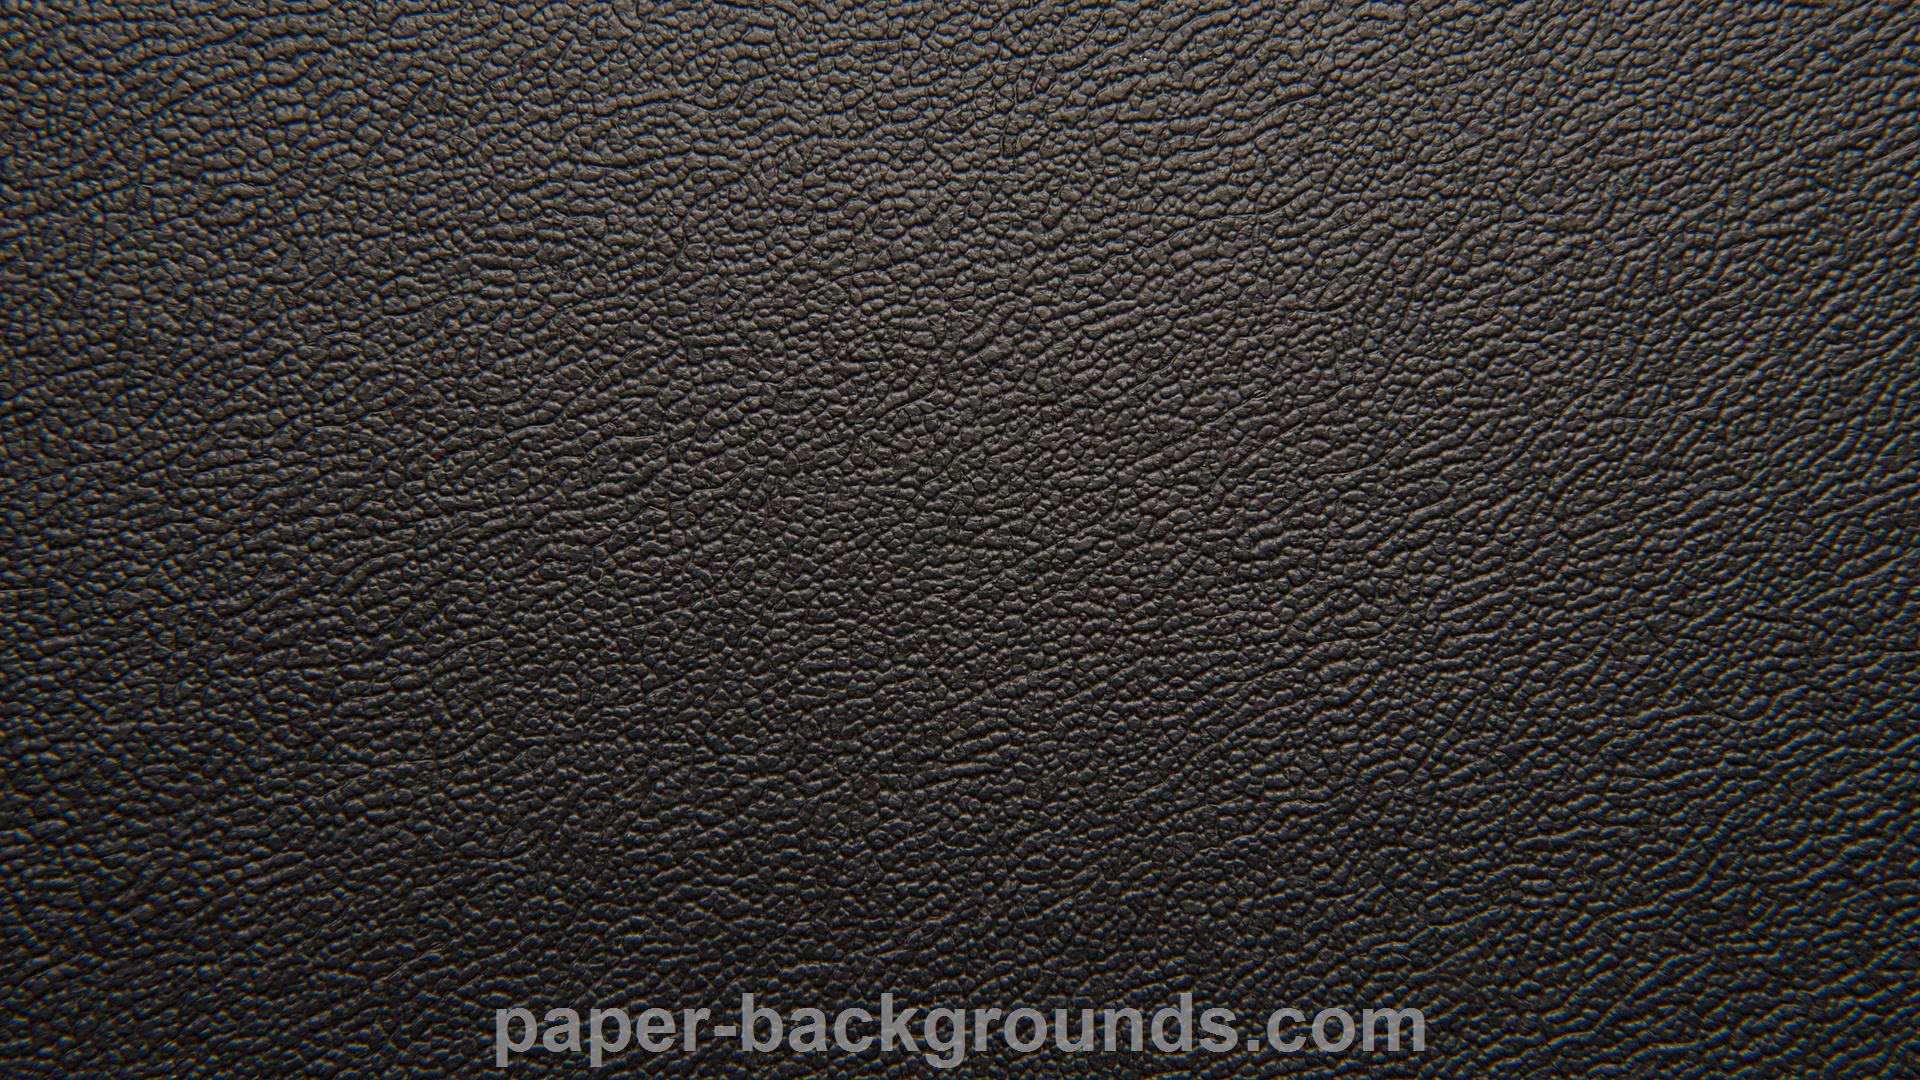 Paper Backgrounds black leather texture background hd